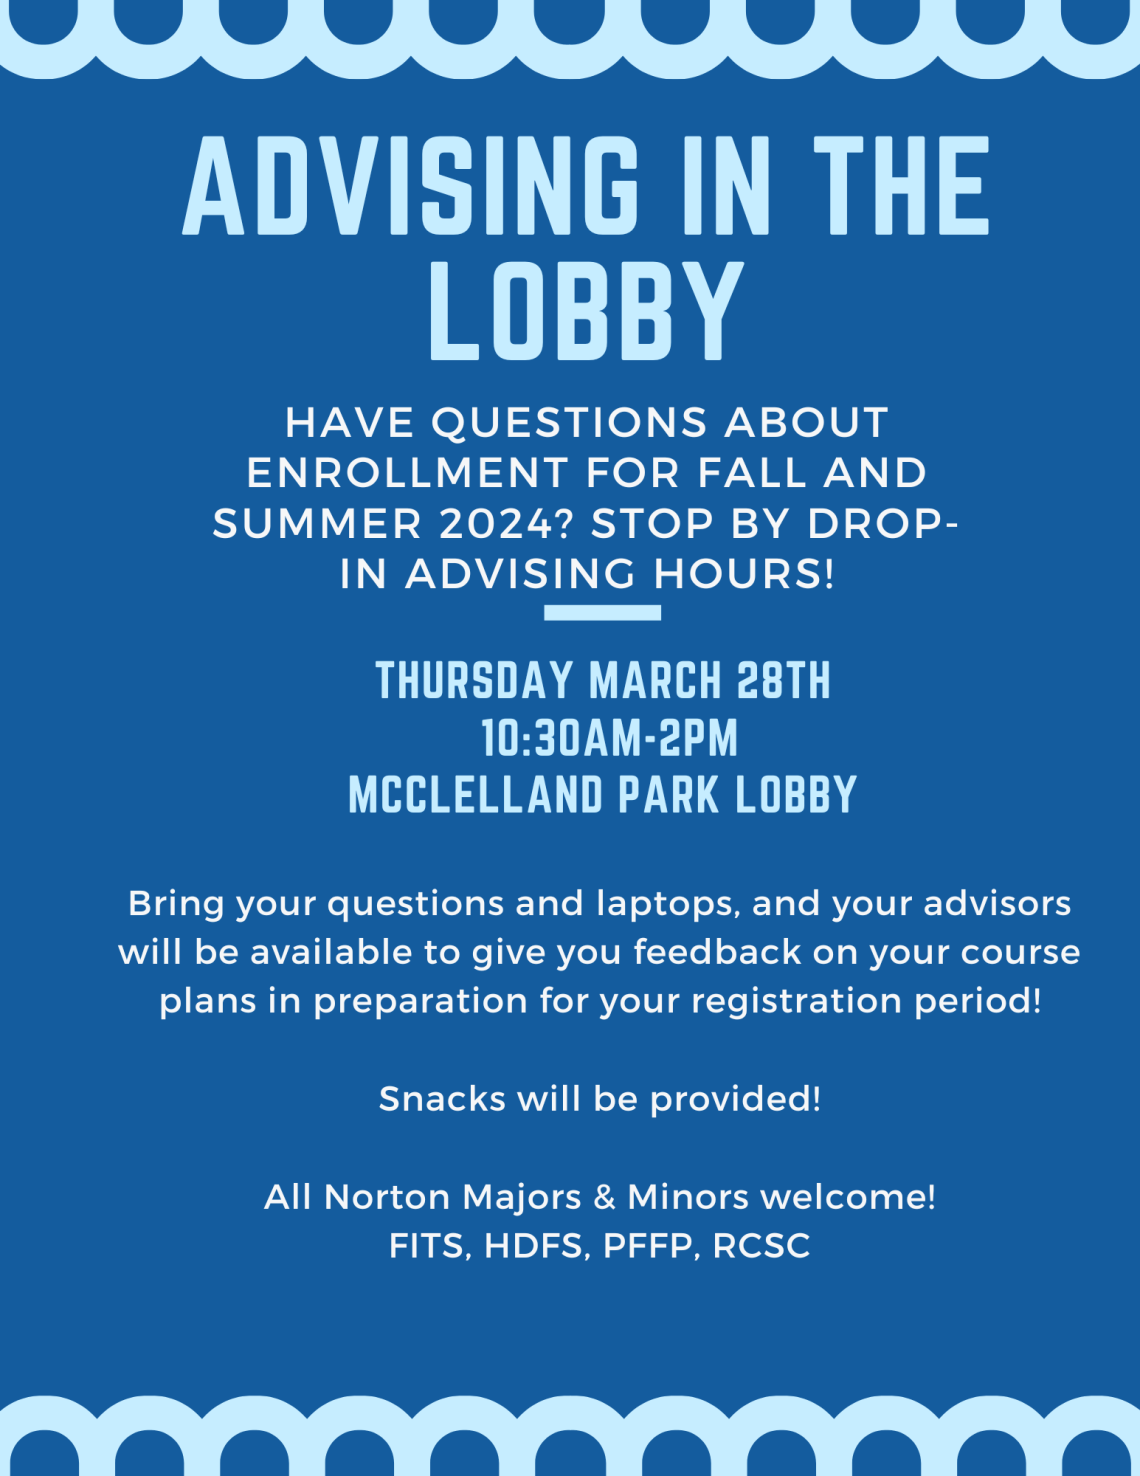 ADVISING IN THE LOBBY Bring your questions and laptops, and your advisors will be available to give you feedback on your course plans in preparation for your registration period! Snacks will be provided! All Norton Majors & Minors welcome! FITS, HDFS, PFFP, RCSC HAVE QUESTIONS ABOUTENROLLMENT FOR FALL ANDSUMMER 2024? STOP BY DROP-IN ADVISING HOURS! THURSDAY MARCH 28TH 10:30AM-2PM MCCLELLAND PARK LOBBY